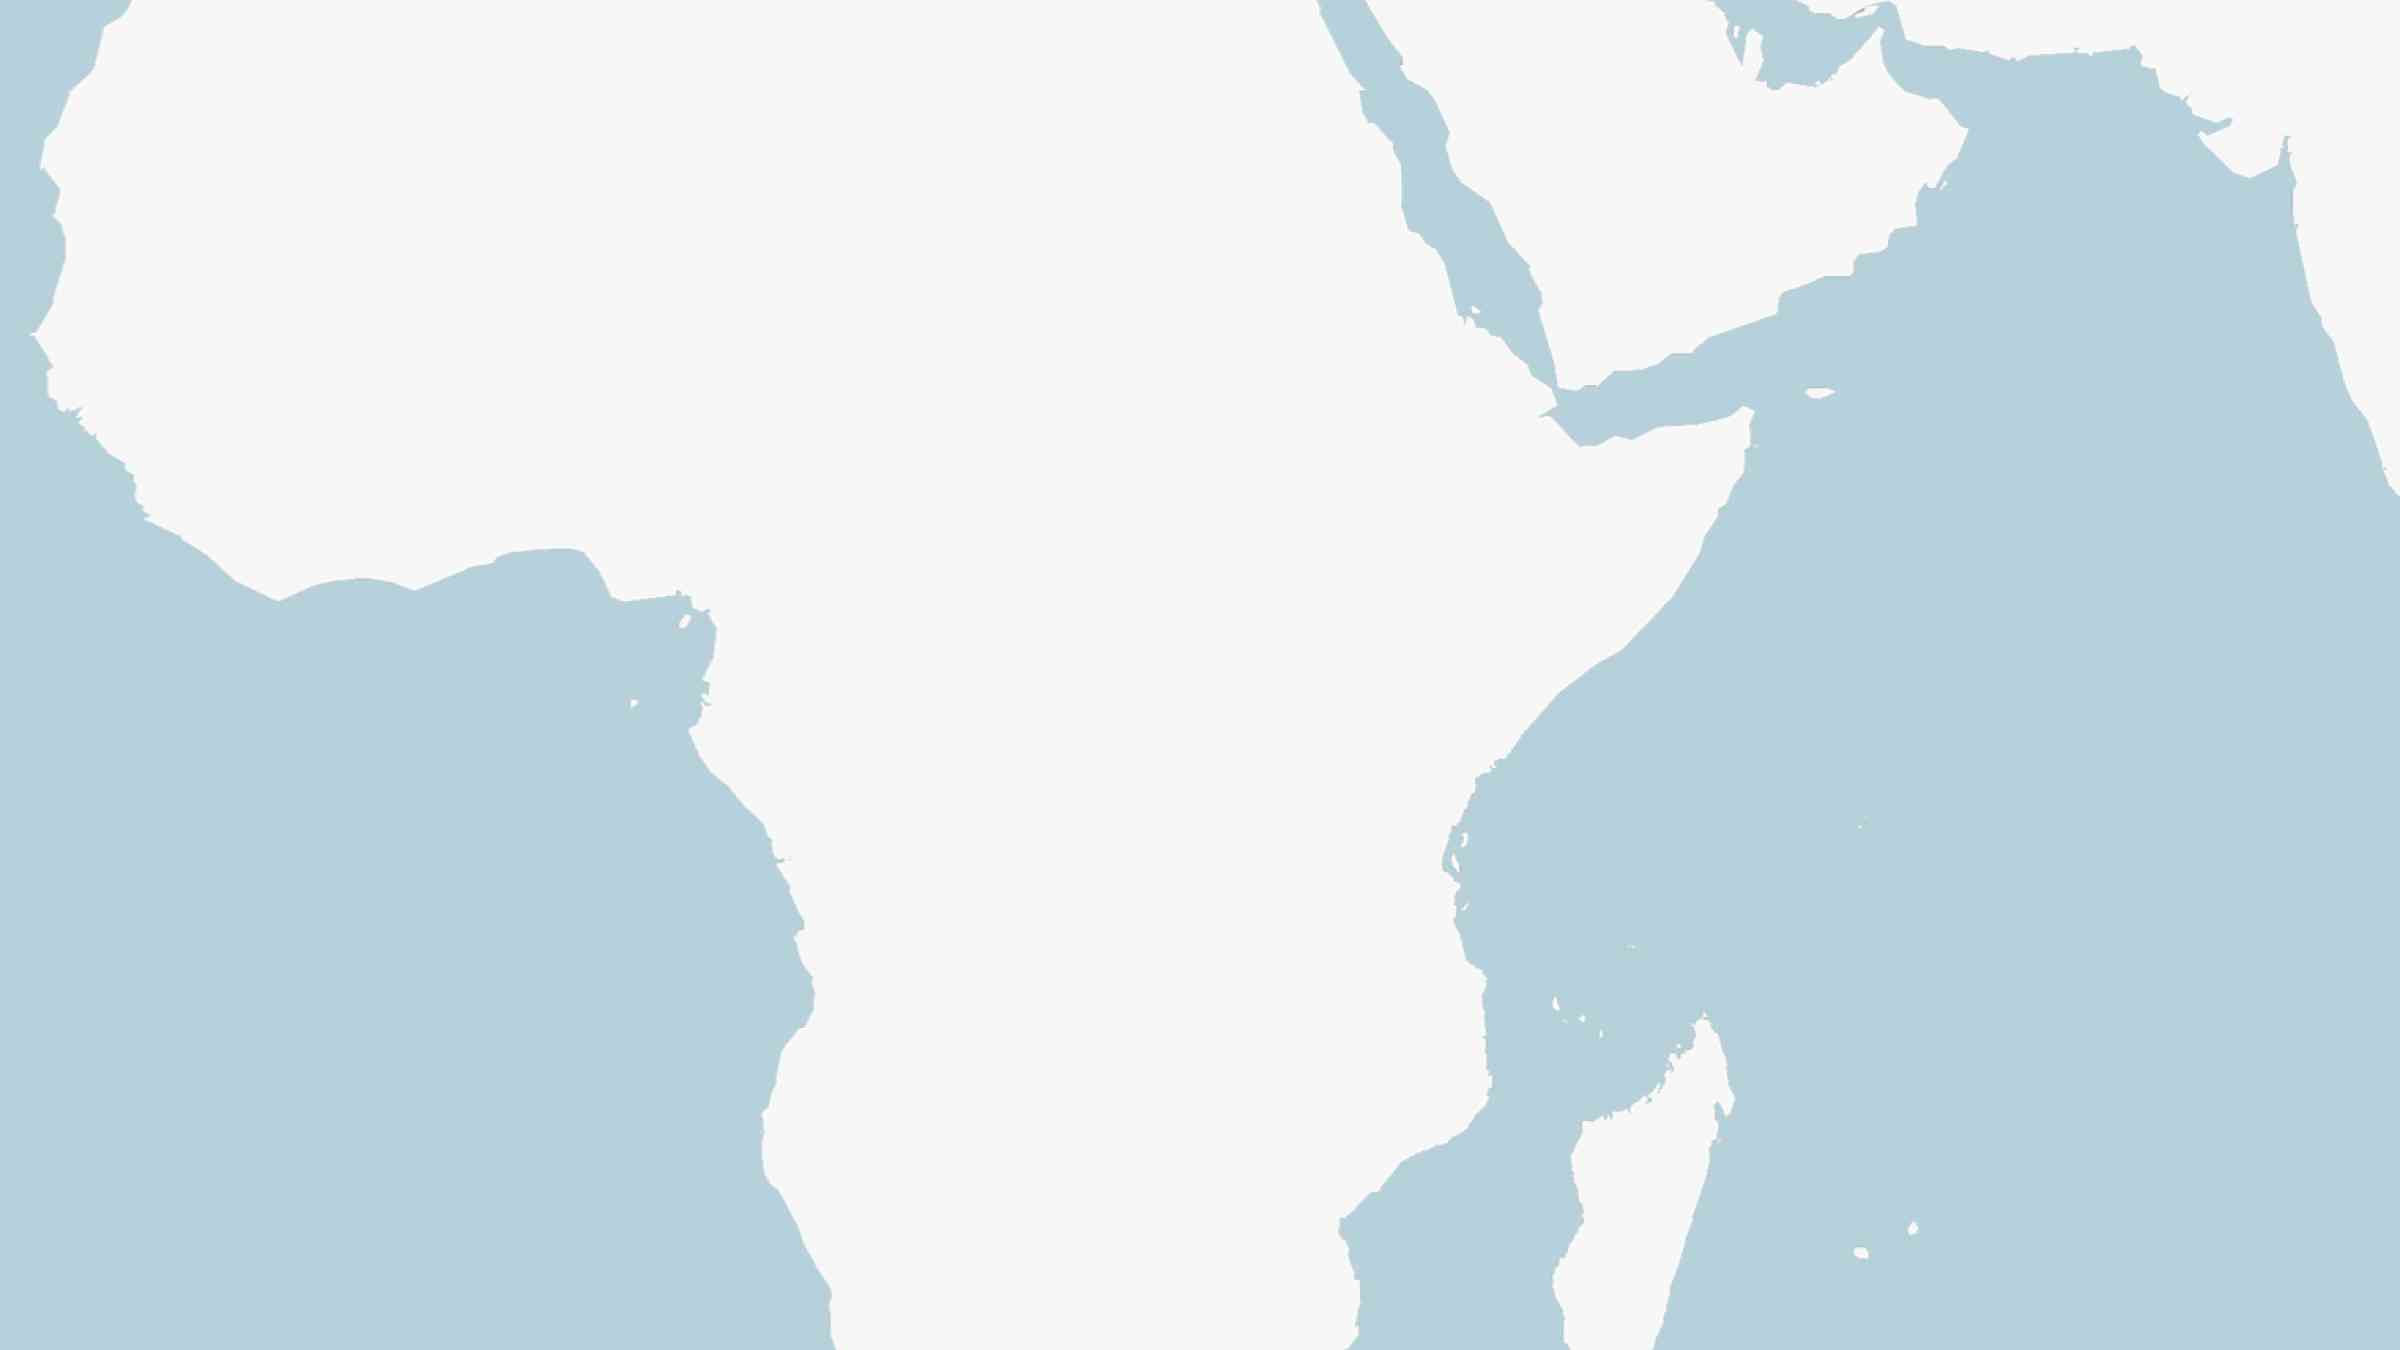 A blank map of Africa, with a blue background 